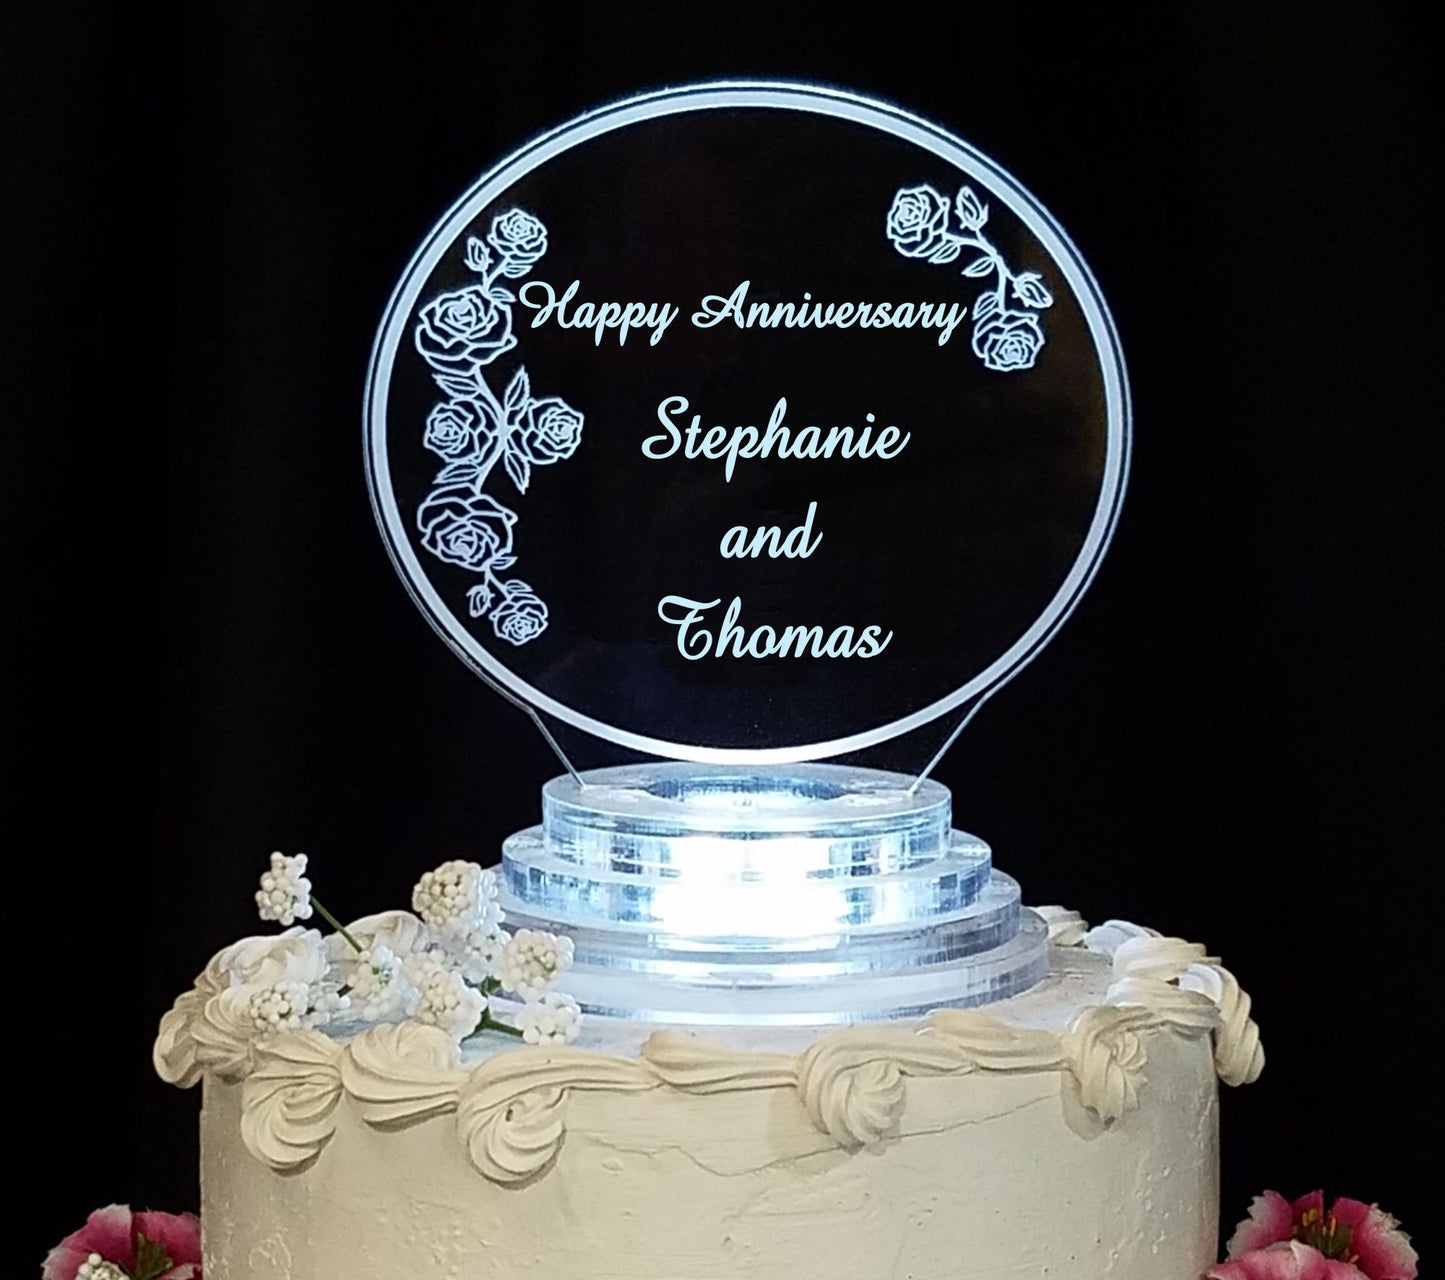 clear acrylic cake topper designed in a rose and rosebud theme,  engraved with Happy Anniversary and names